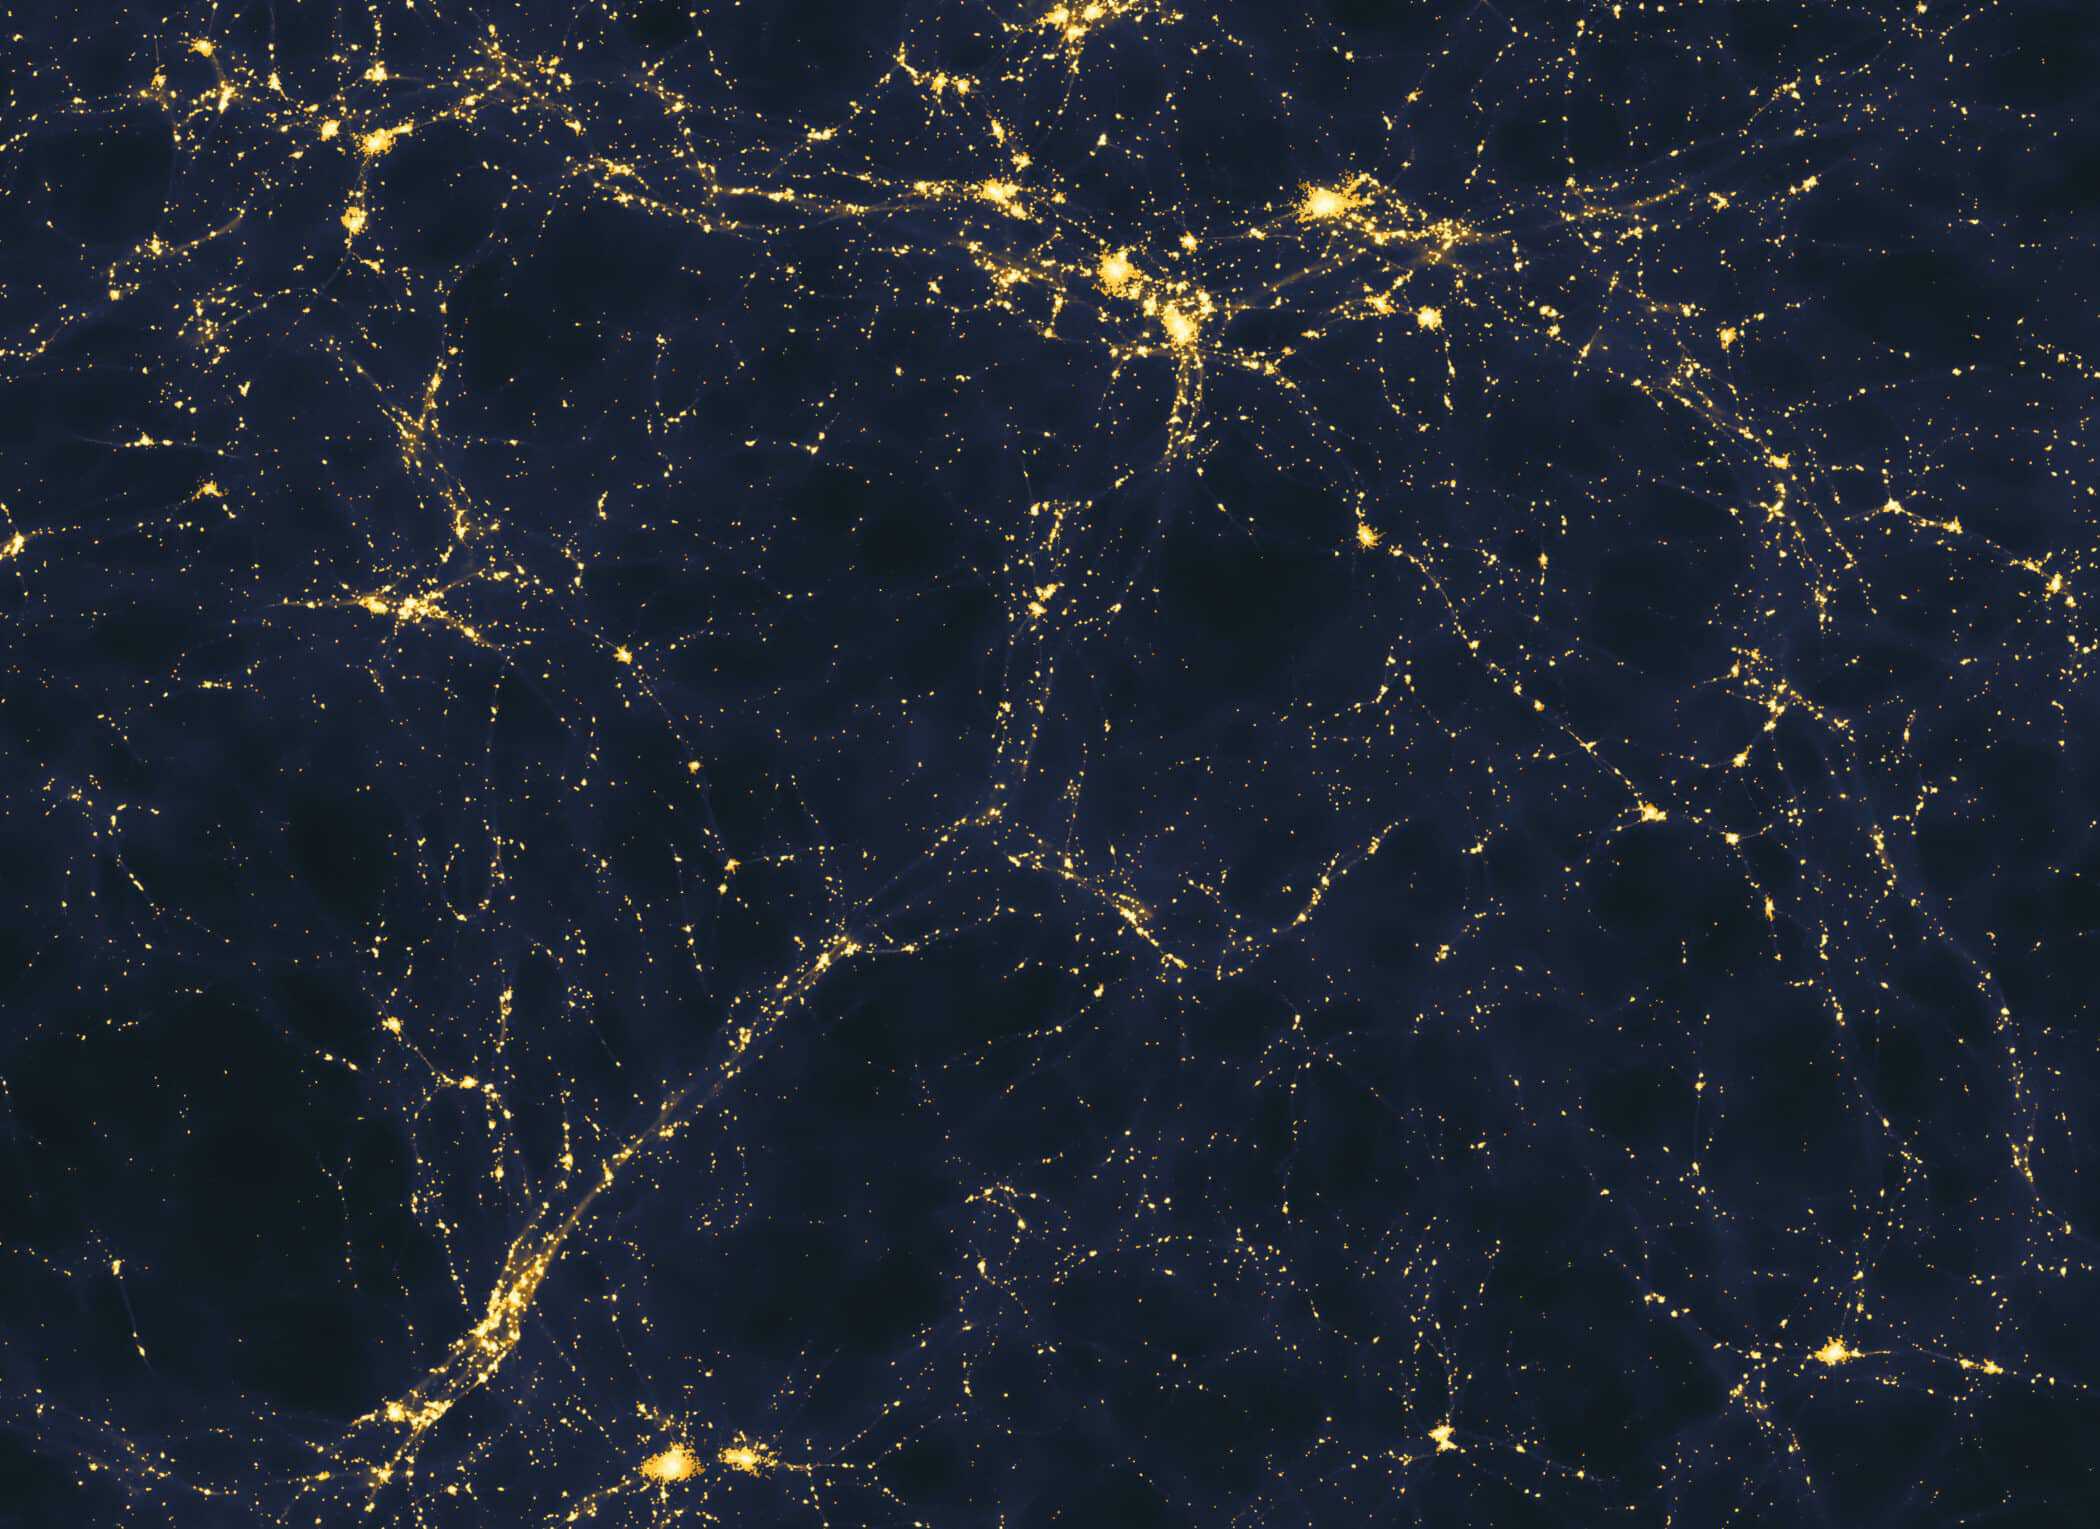 Large scale structure of light distribution in the universe